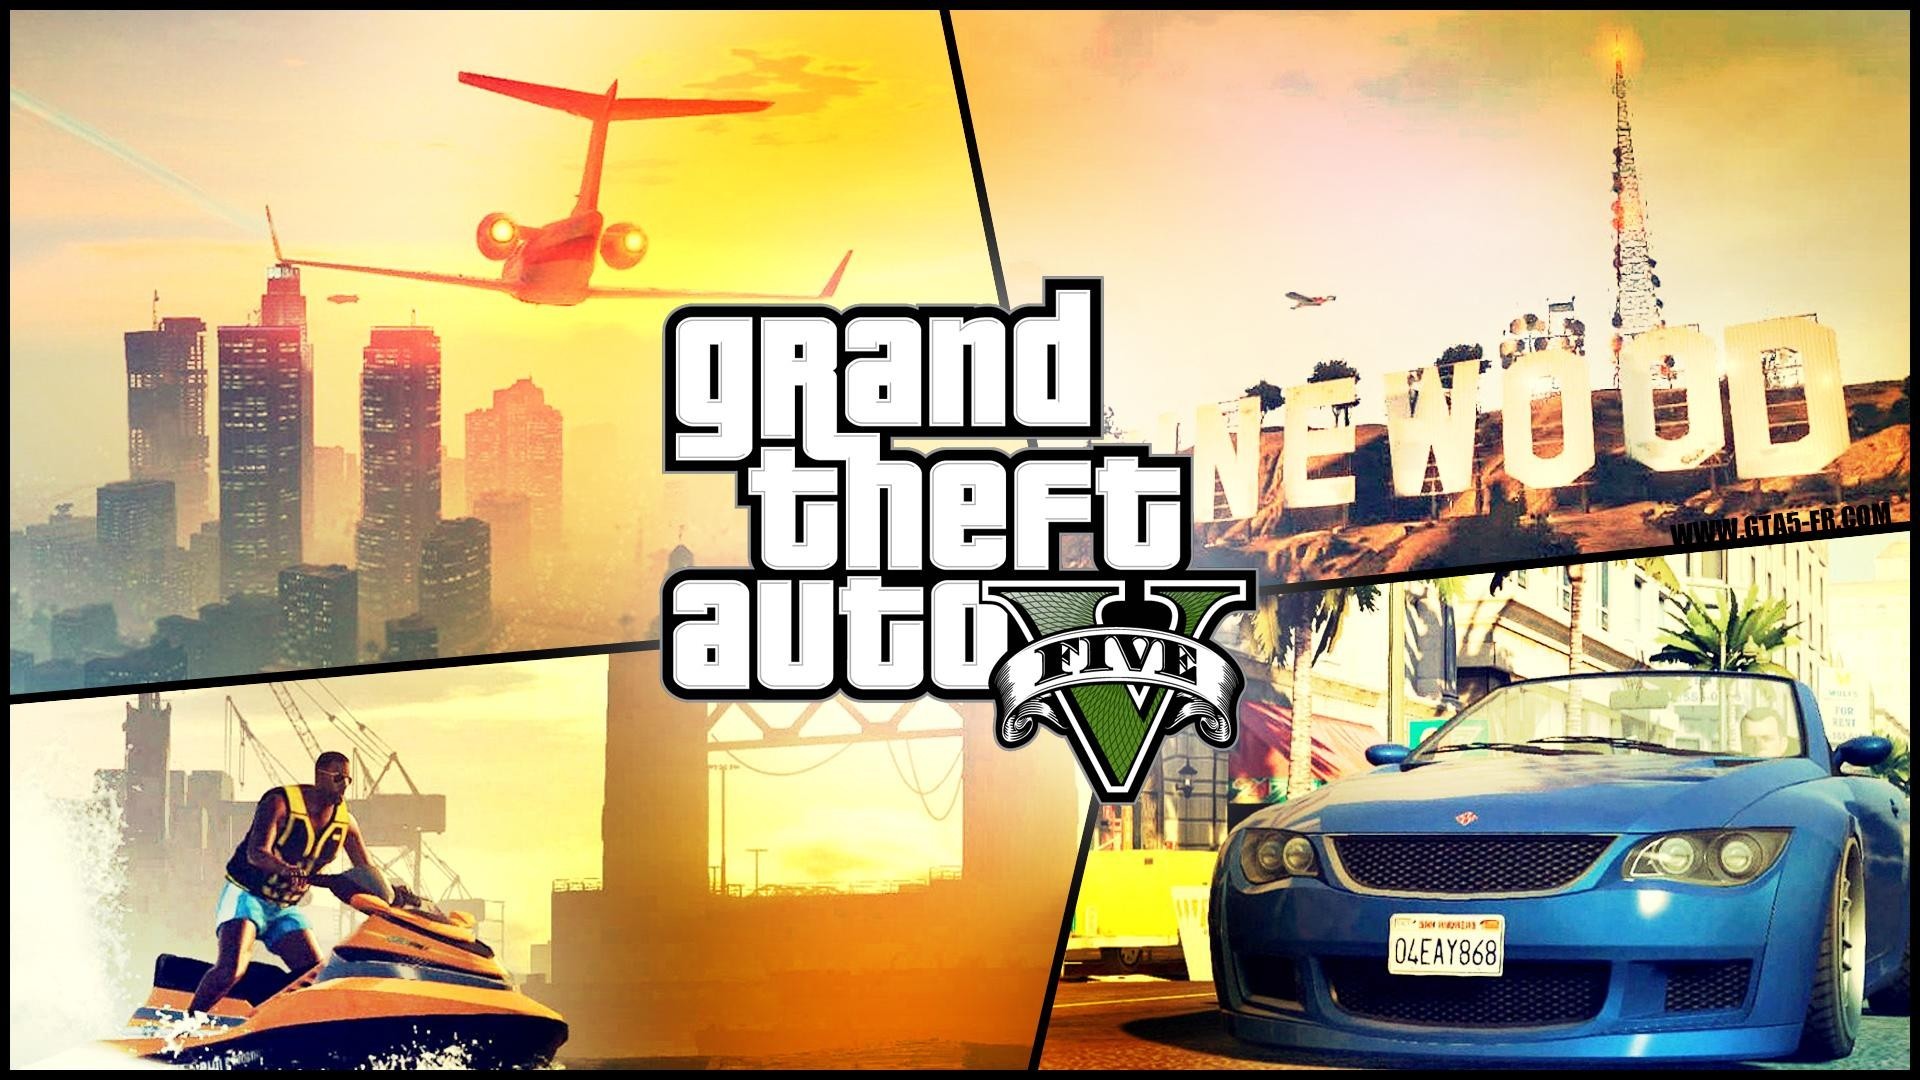 General 1920x1080 Grand Theft Auto V collage video games PC gaming video game art Rockstar Games